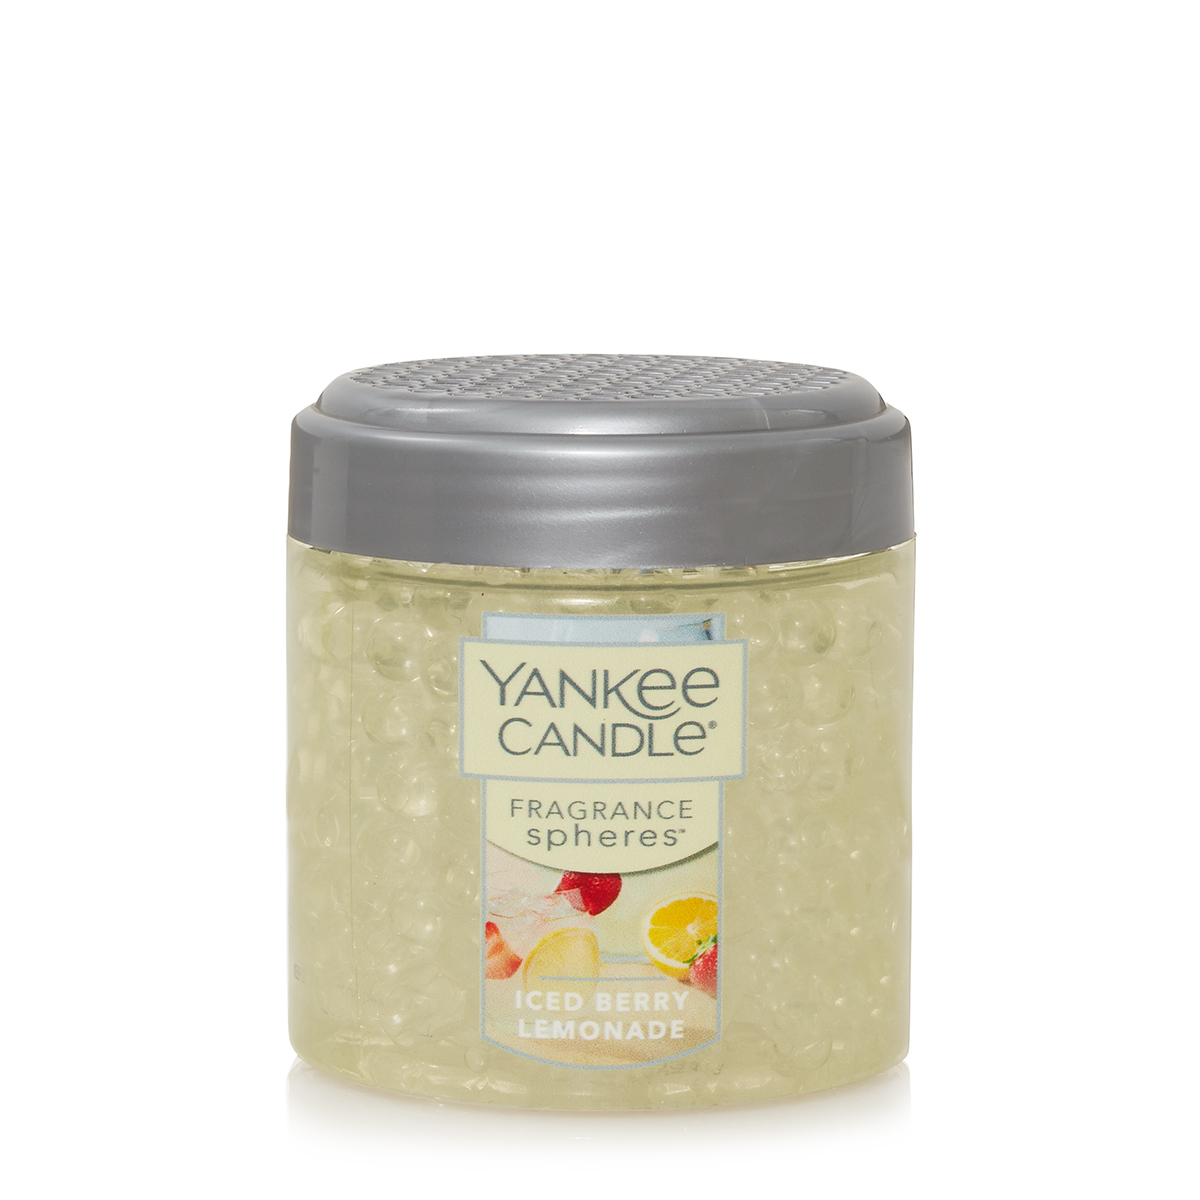 Yankee Candle(R) Iced Berry Lemonade Scent Beads